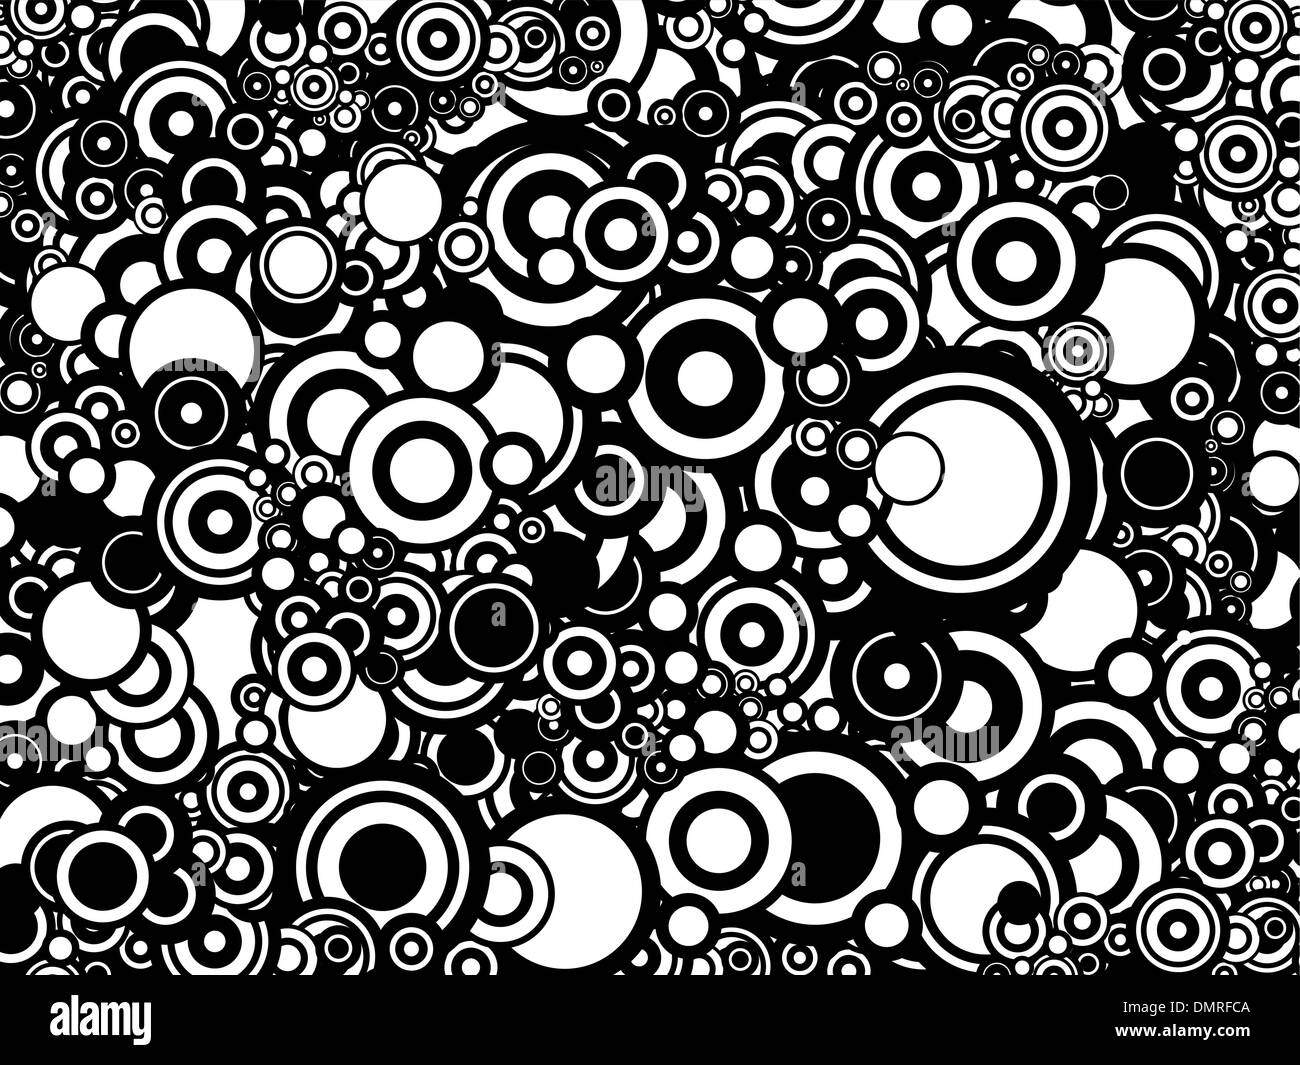 Black and white circles background / pattern / texture Stock Vector